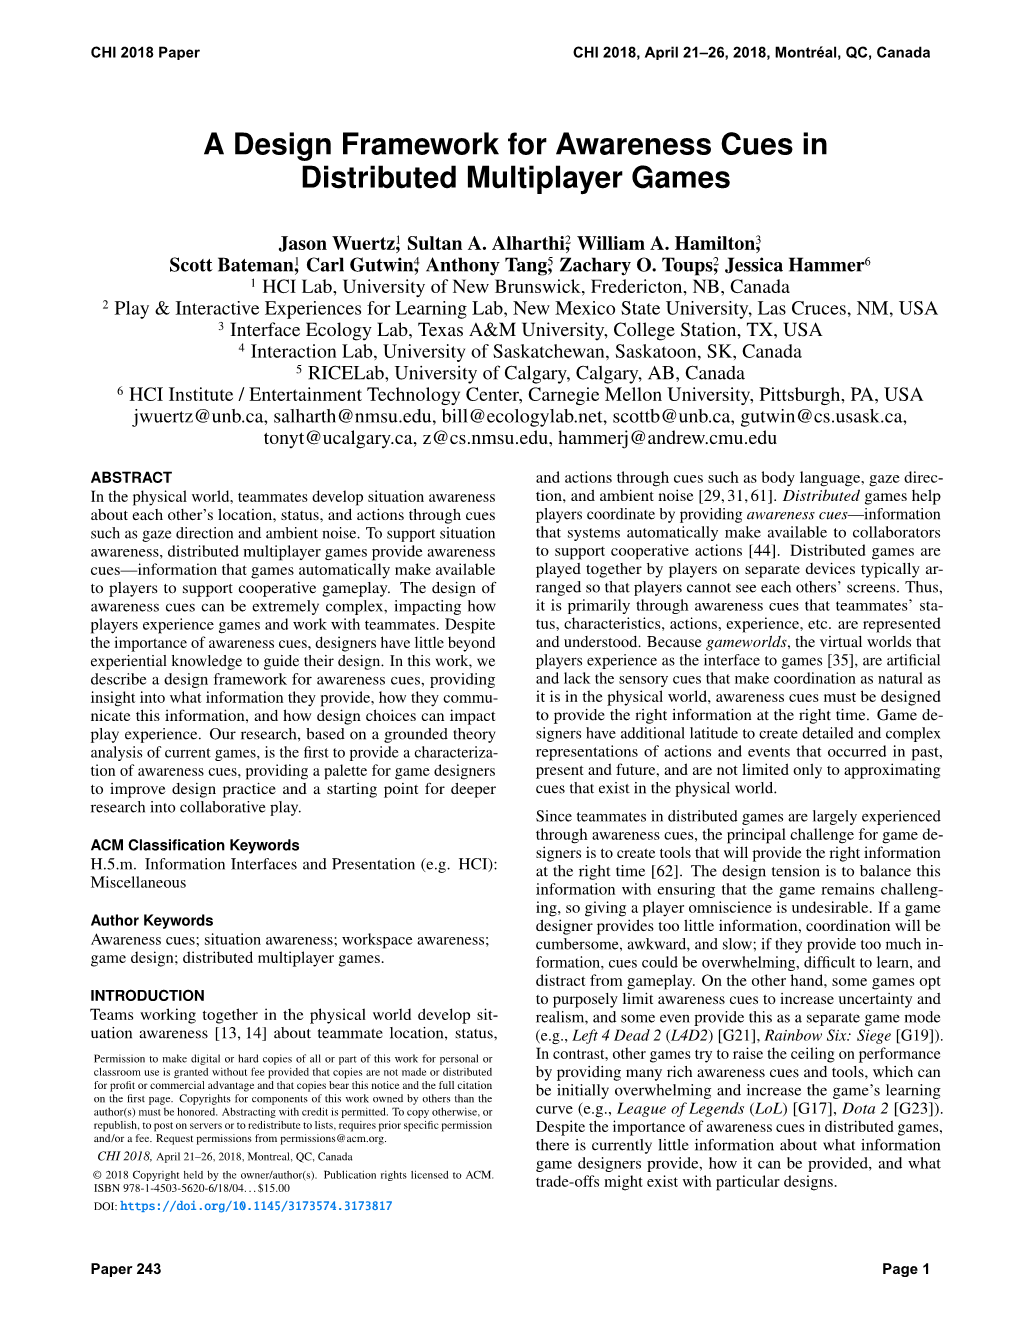 A Design Framework for Awareness Cues in Distributed Multiplayer Games